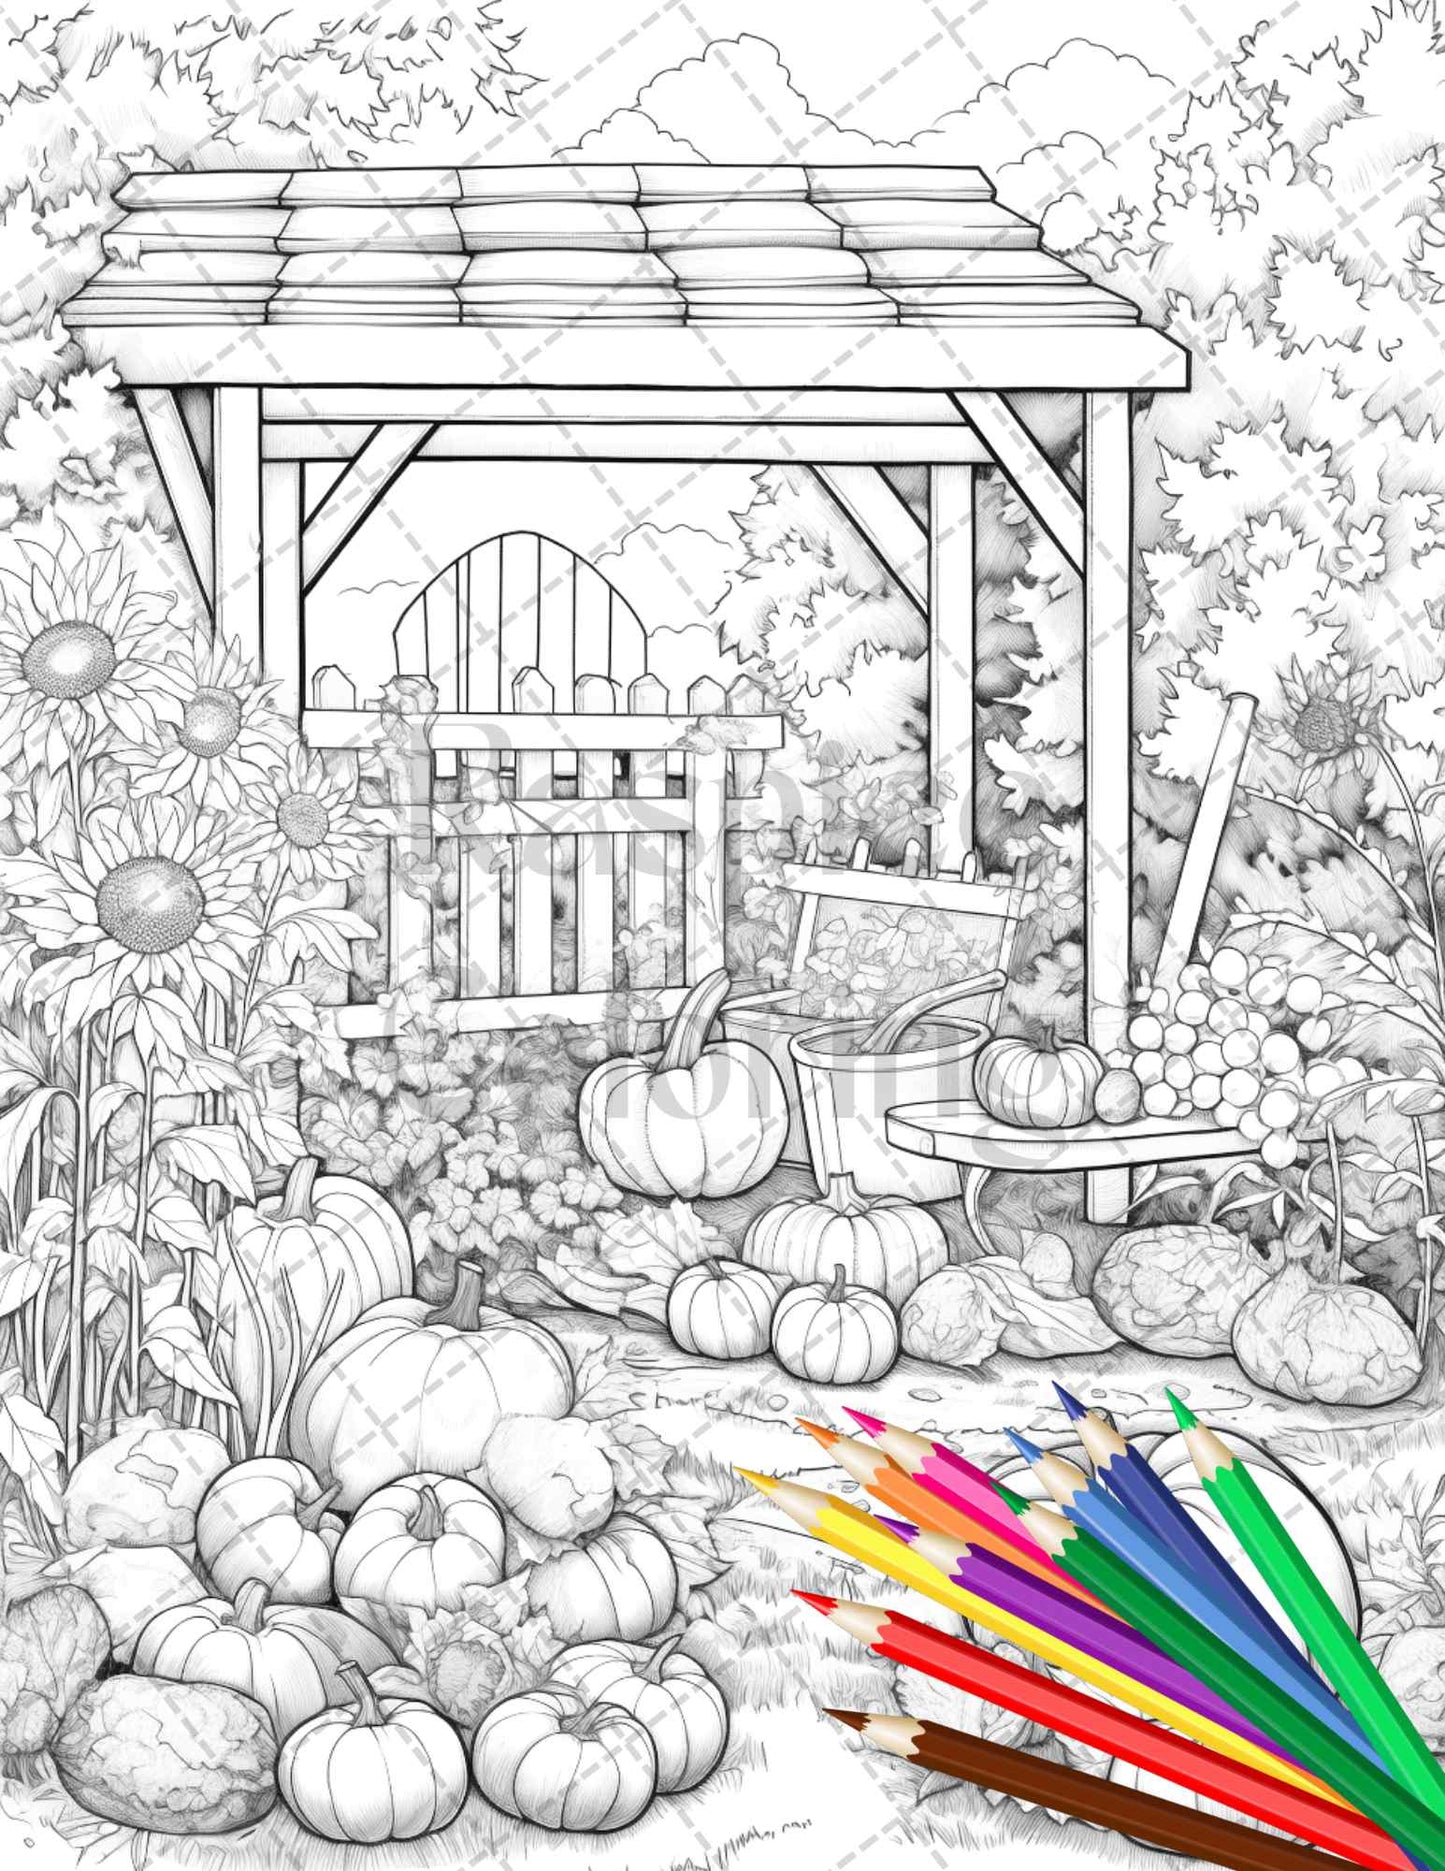 Pumpkin Garden Scenery Grayscale Coloring Pages Printable for Adults, PDF File Instant Download - raspiee